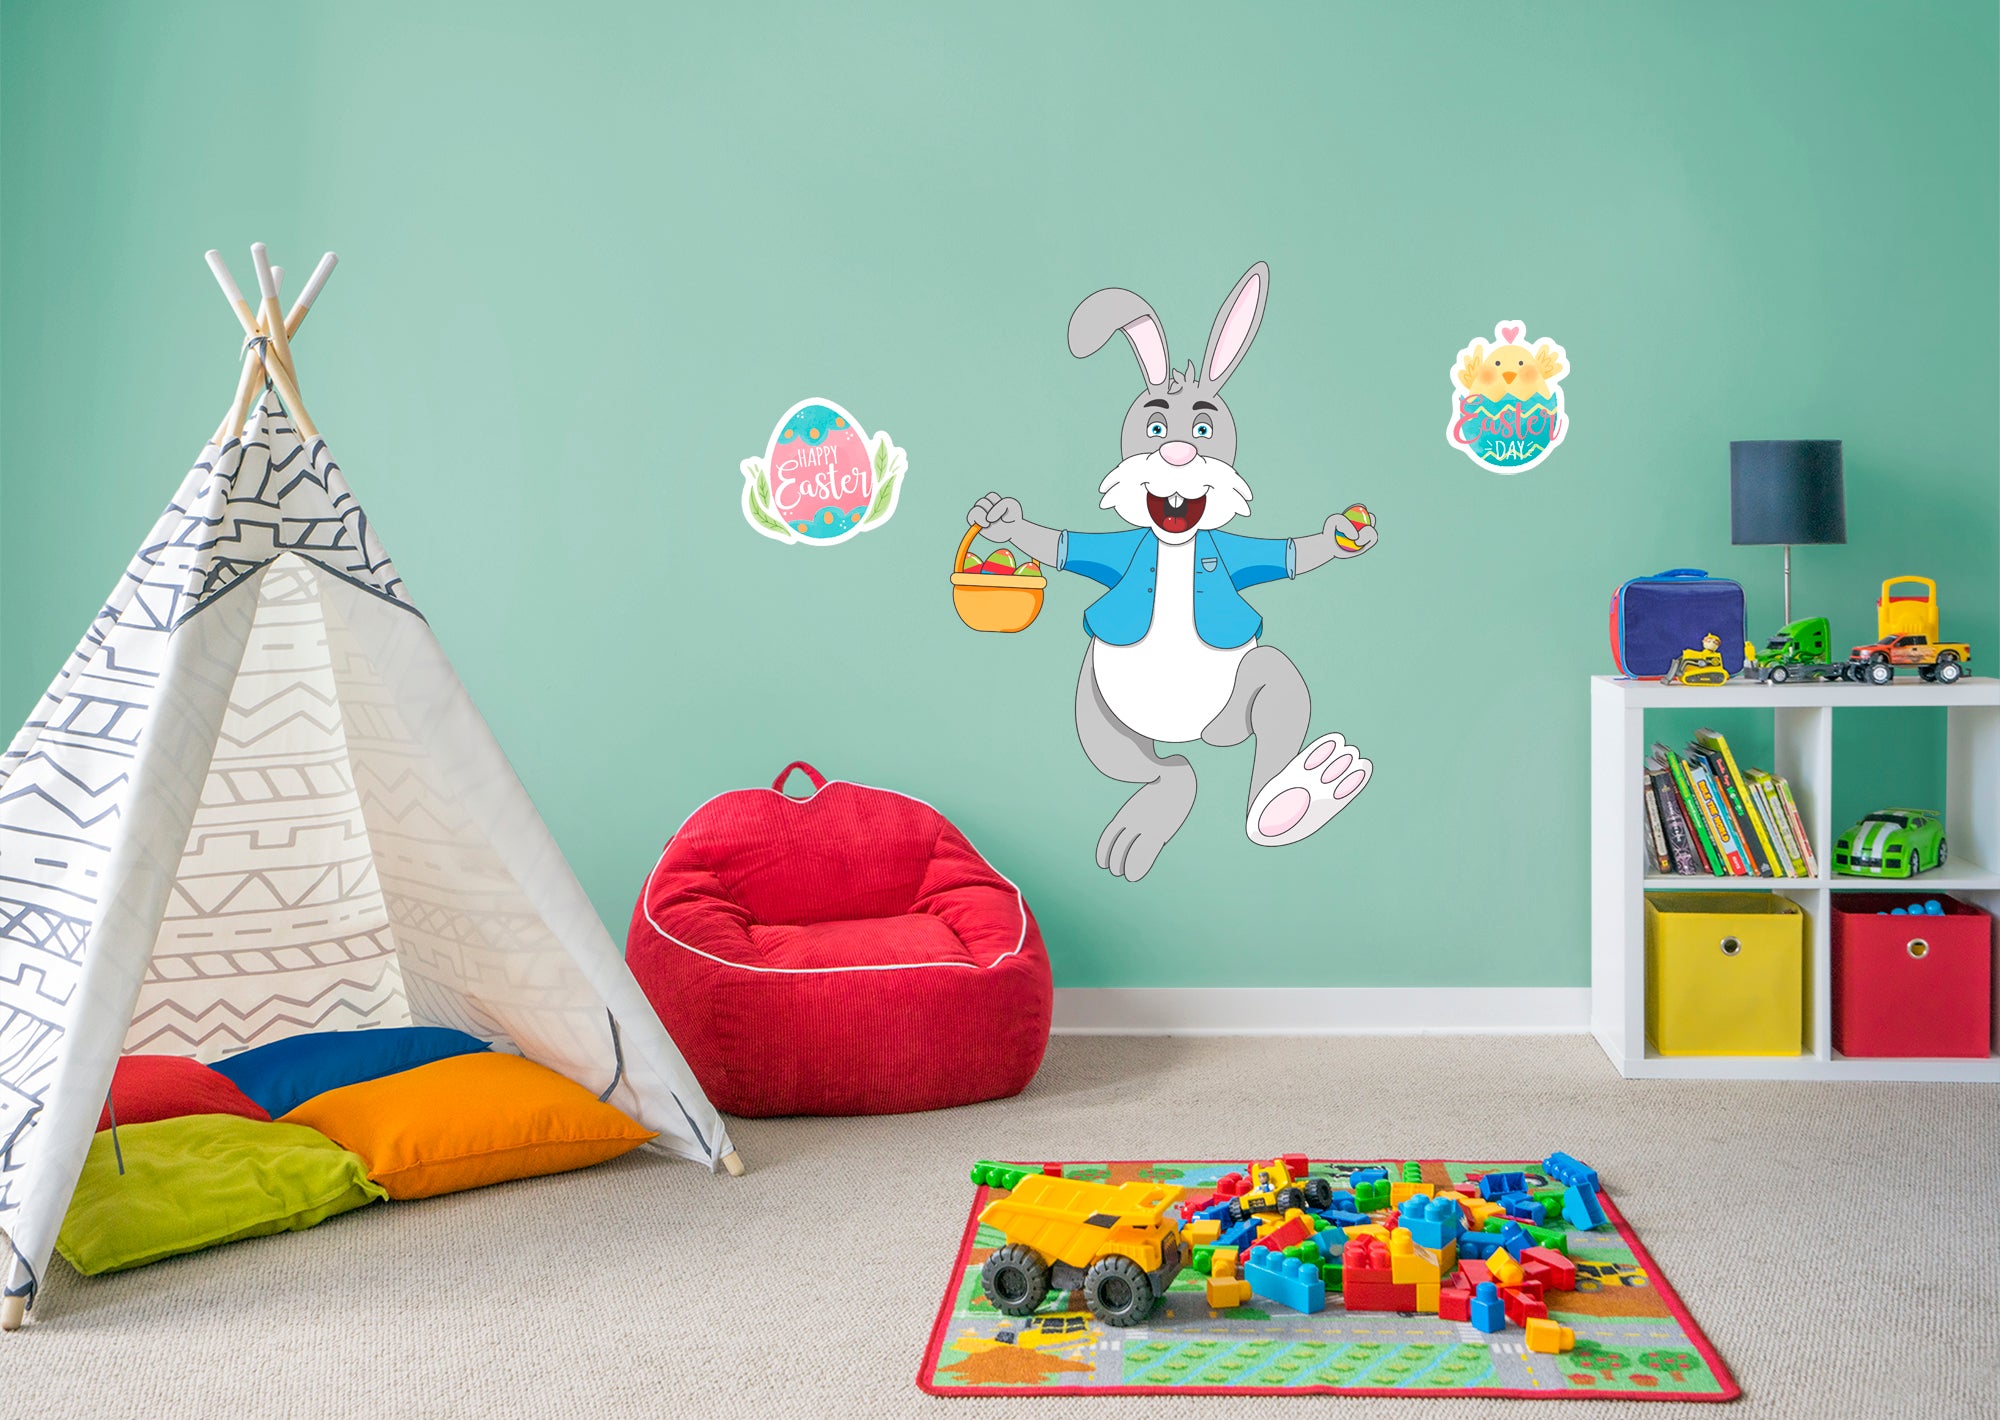 Easter Bunny - Removable Wall Decal Giant Character + 2 Decals by Fathead | Vinyl